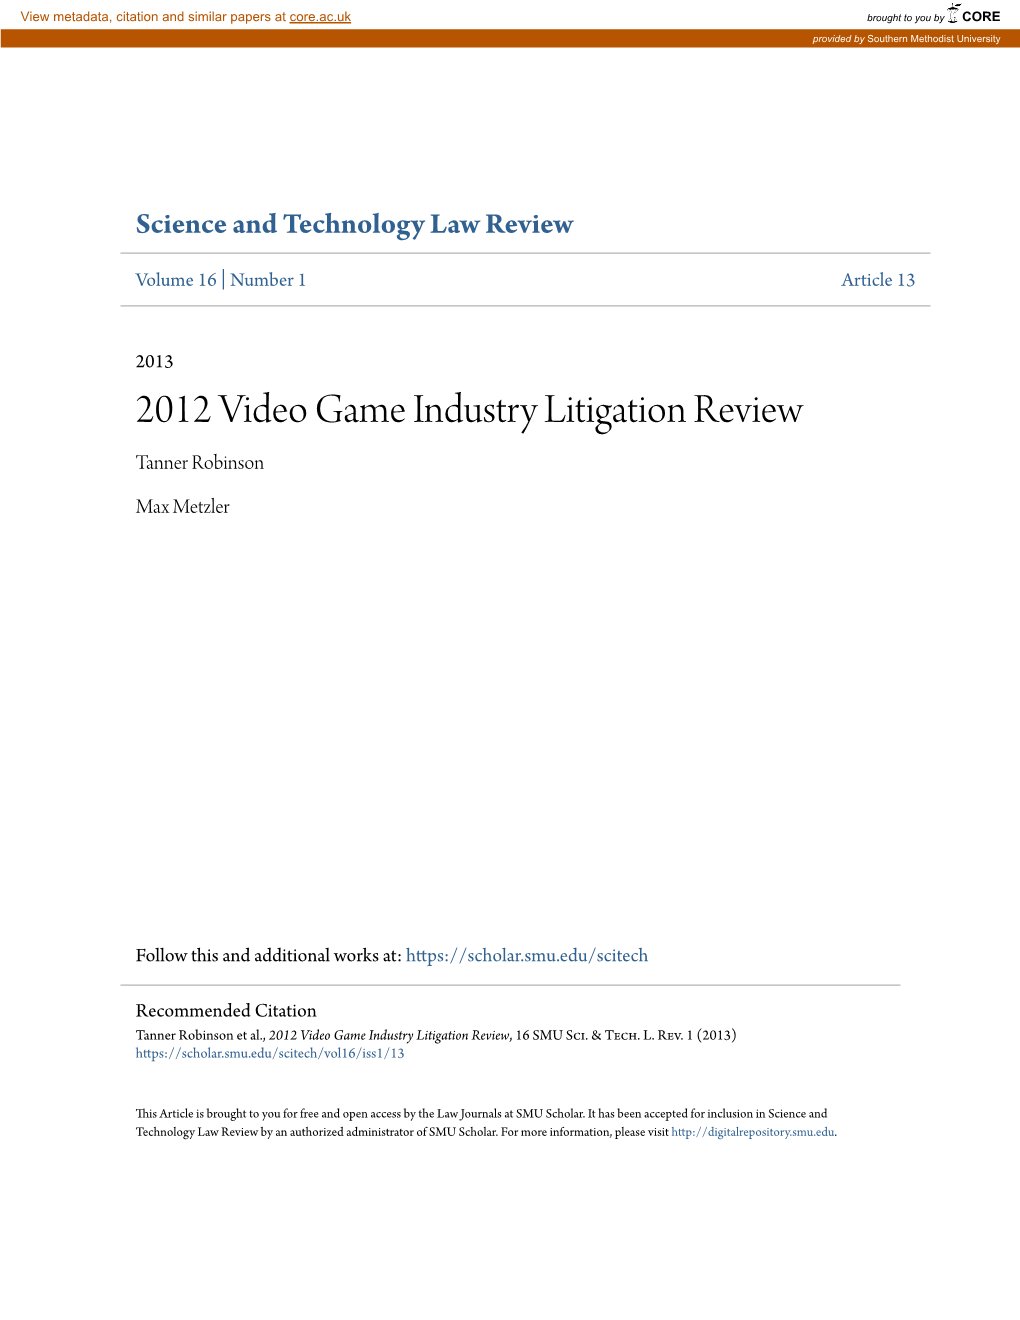 2012 Video Game Industry Litigation Review Tanner Robinson